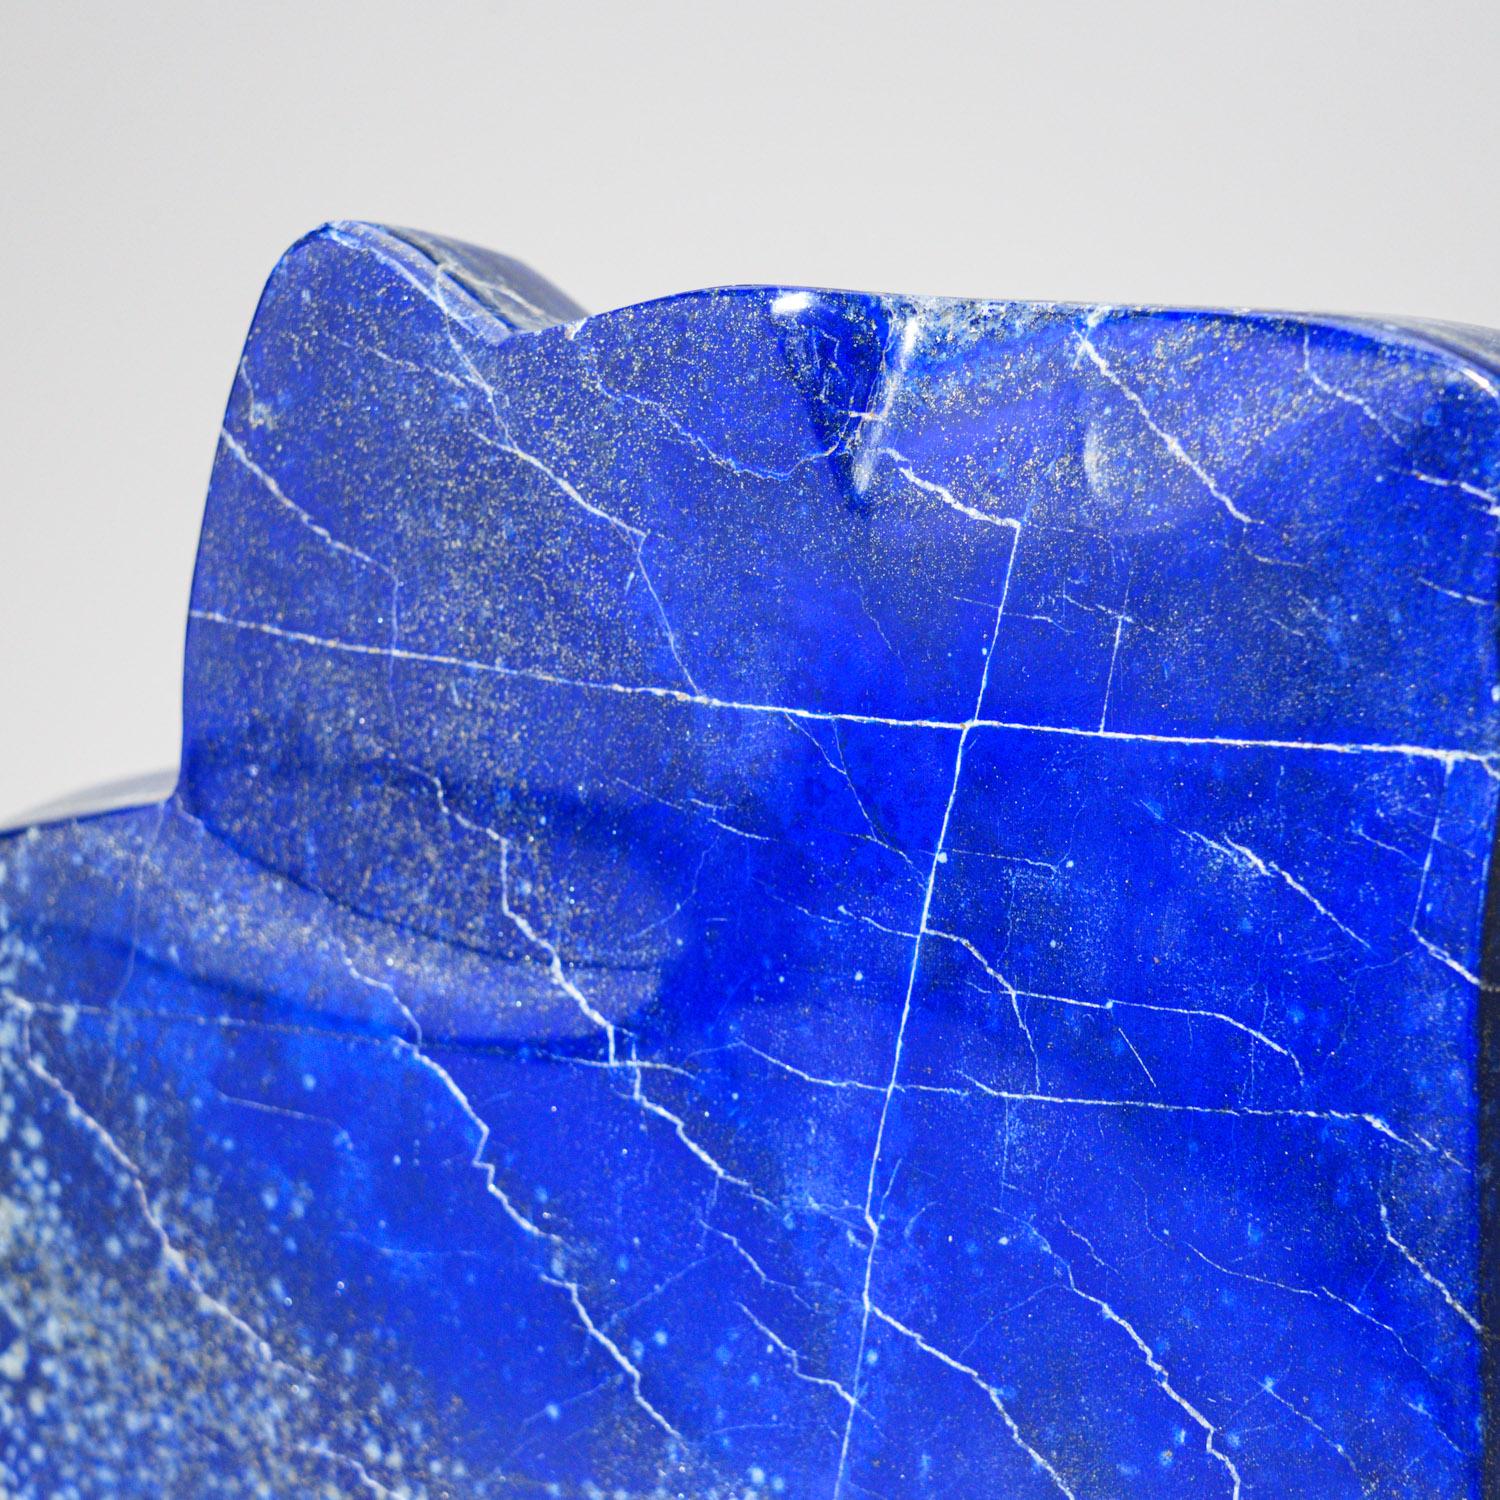 Beautiful hand-polished free form of AAA quality natural Afghani lapis lazuli.  This specimen has rich, electric-royal blue color enriched with scintillating pyrite micro-crystals.

Lapis Lazuli is a powerful crystal for activating the higher mind